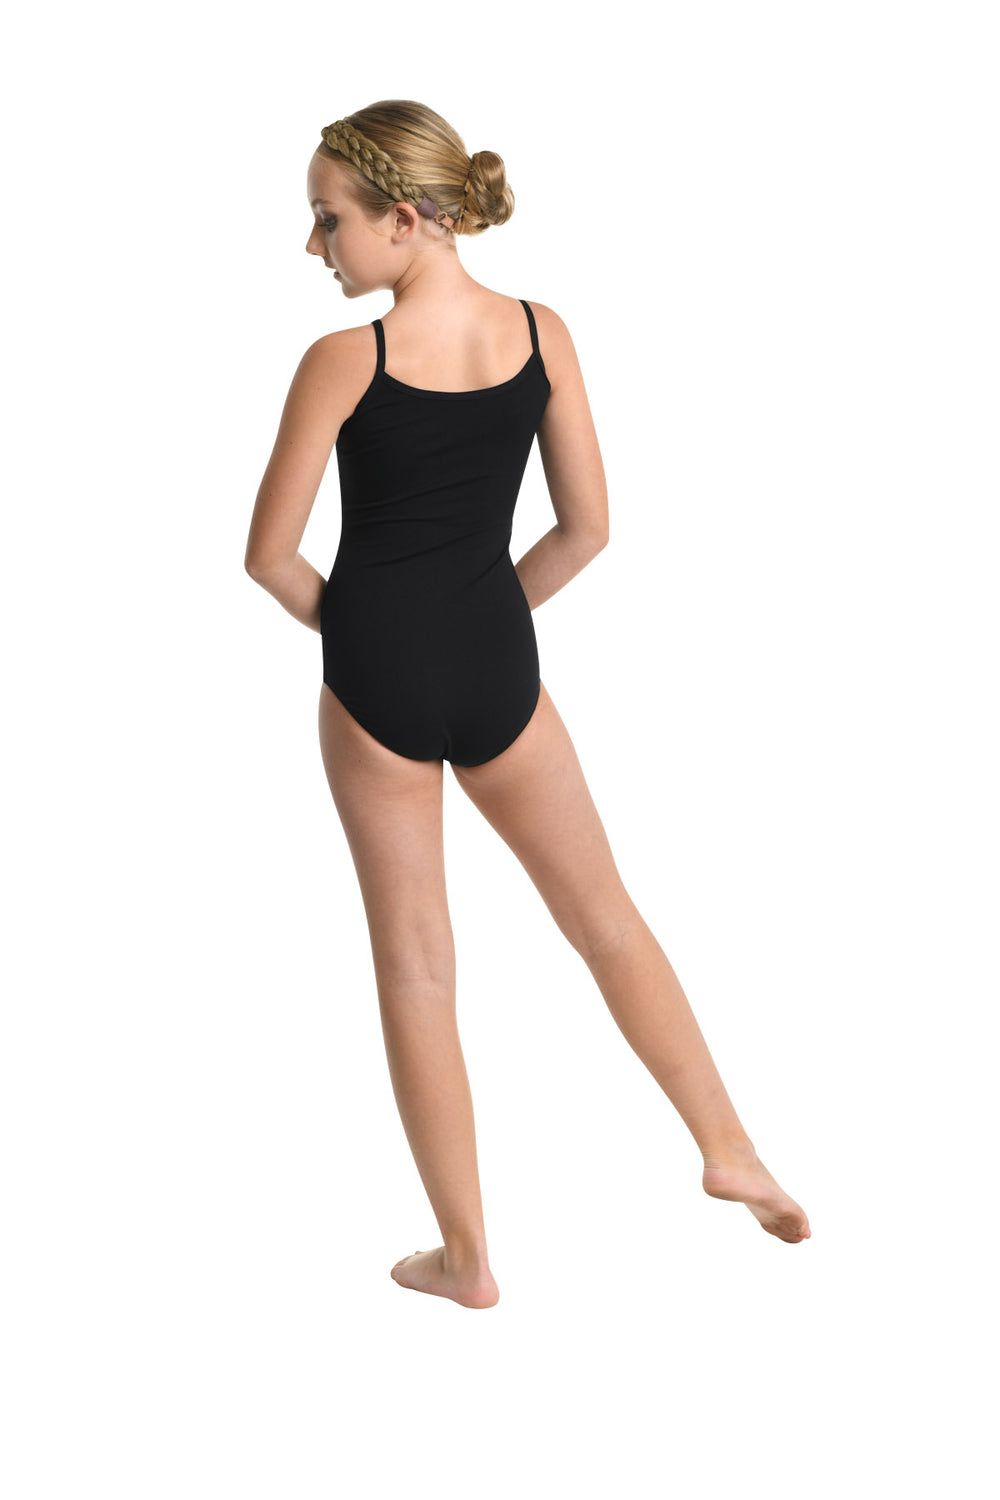 Danz N Motion Nude Camisole Body Liner : Kids and Adult Sizes